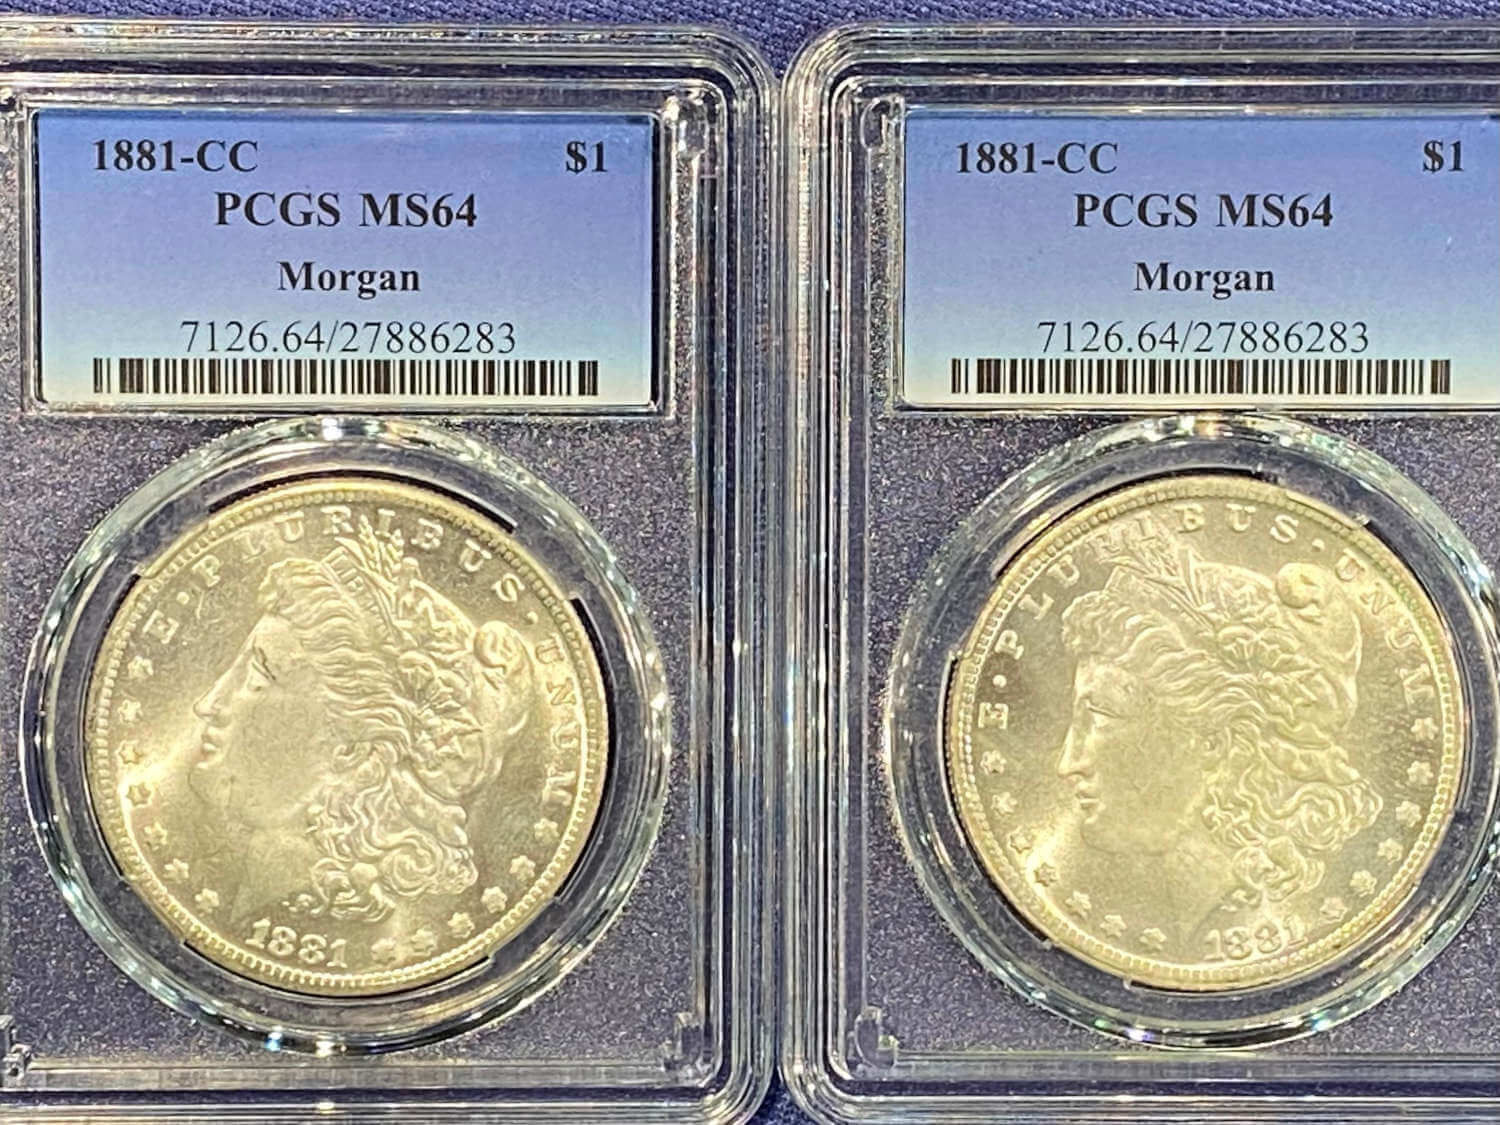 03-Fake Morgans with matching certs